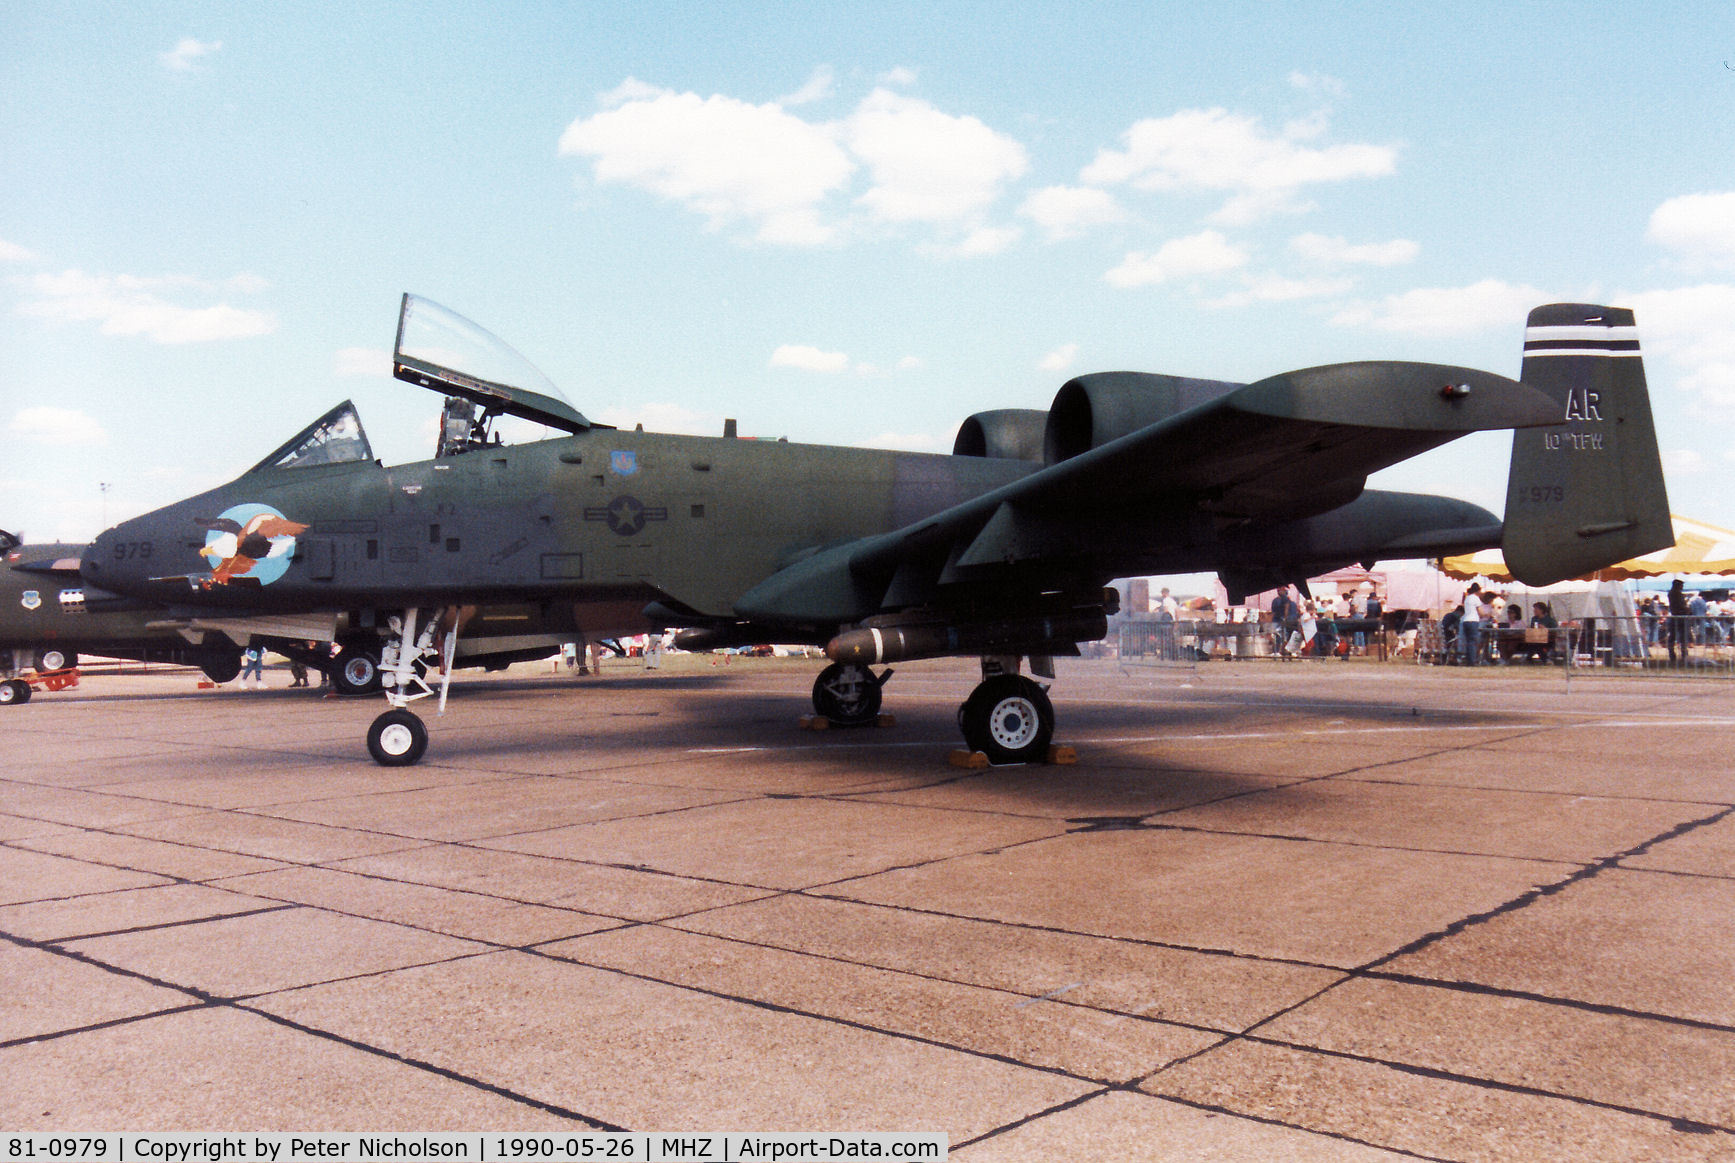 81-0979, Fairchild Republic OA-10A Thunderbolt II C/N A10-0674, A-10A Thunderbolt of 509th Tactical Fighter Squadron/10th Tactical Fighter Wing on display at the 1990 RAF Mildenhall Air Fete.